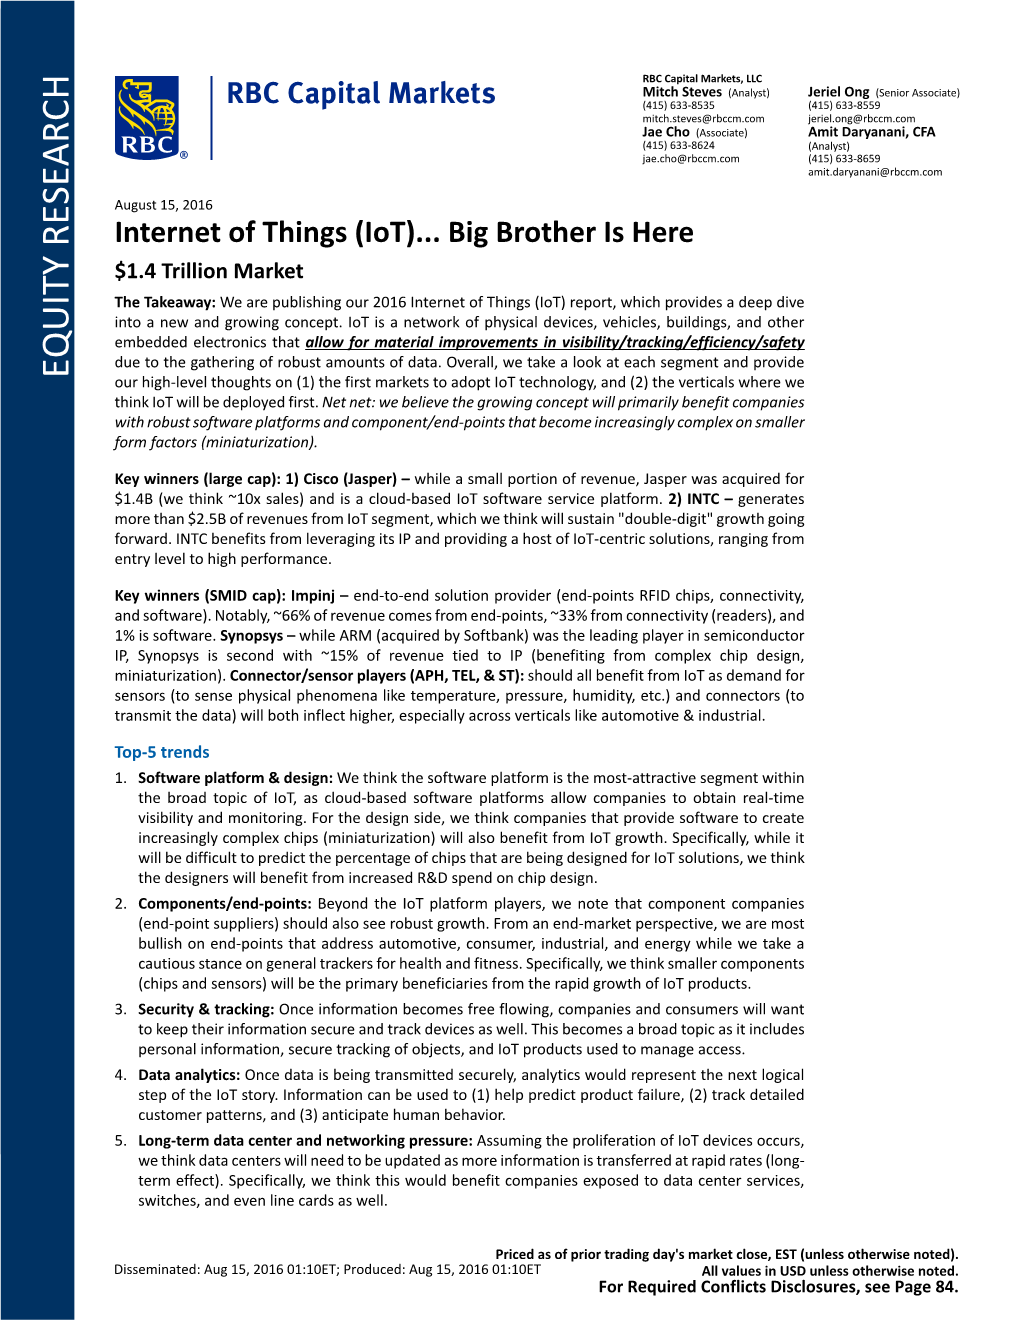 Internet of Things (Iot)... Big Brother Is Here